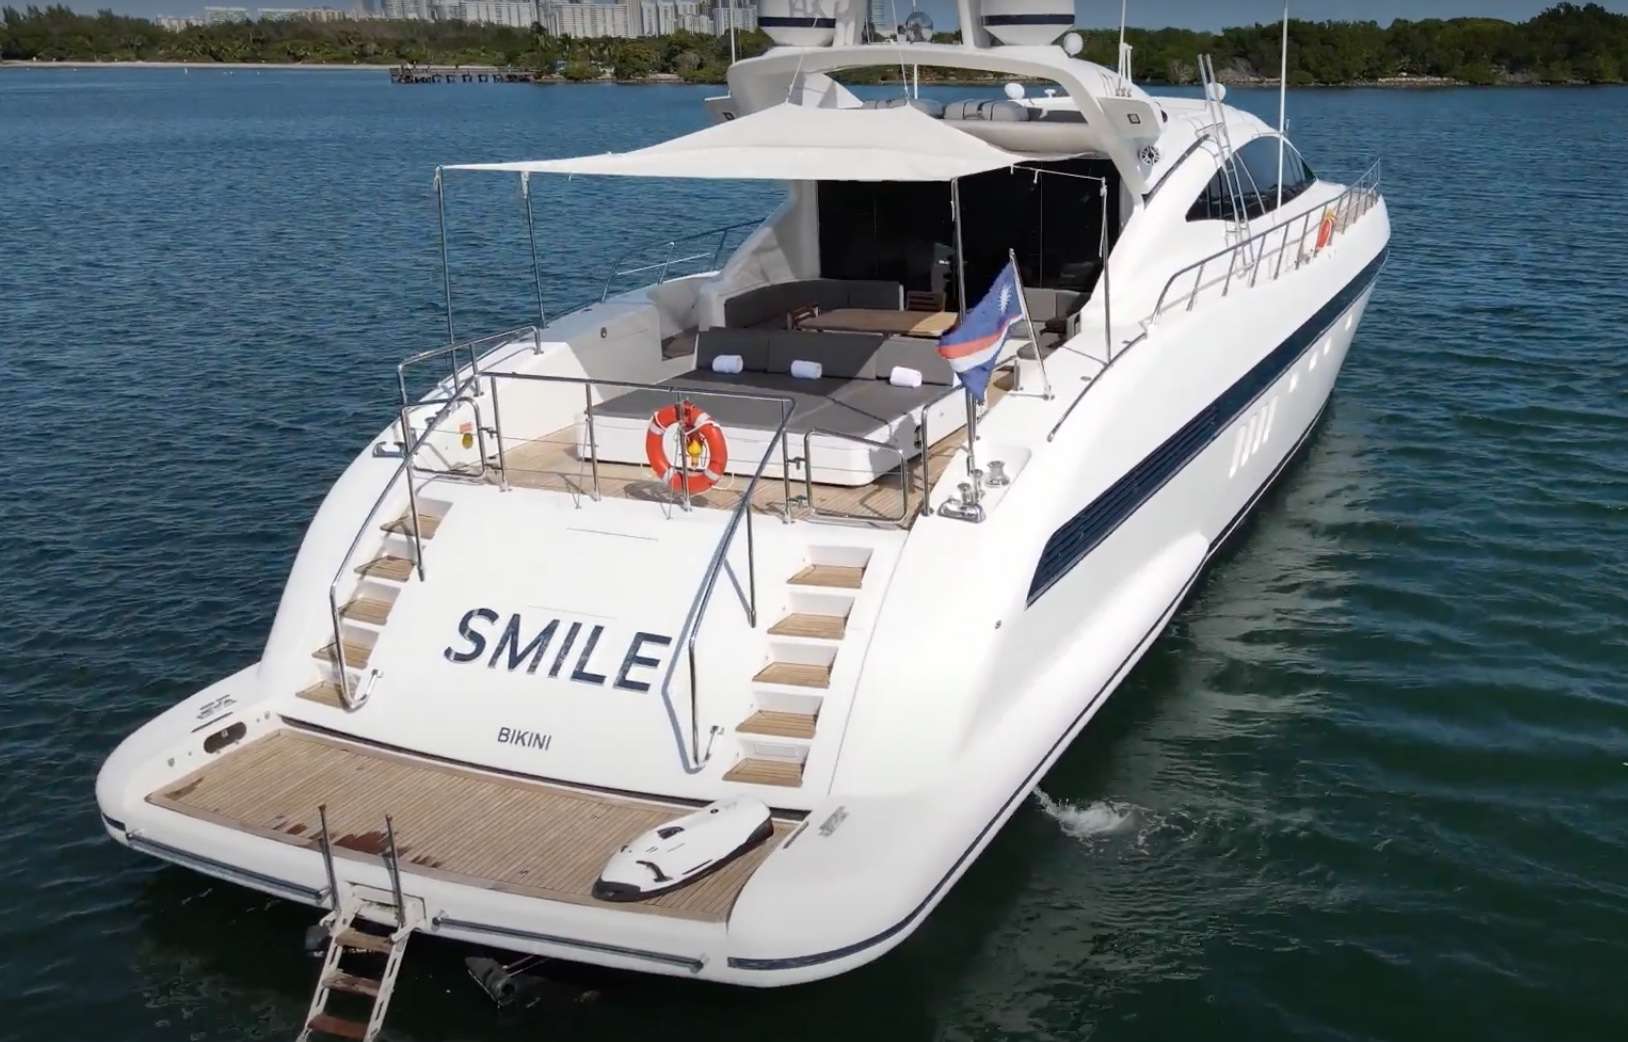 SMILE - Yacht Charter Miami & Boat hire in Florida & Bahamas 3